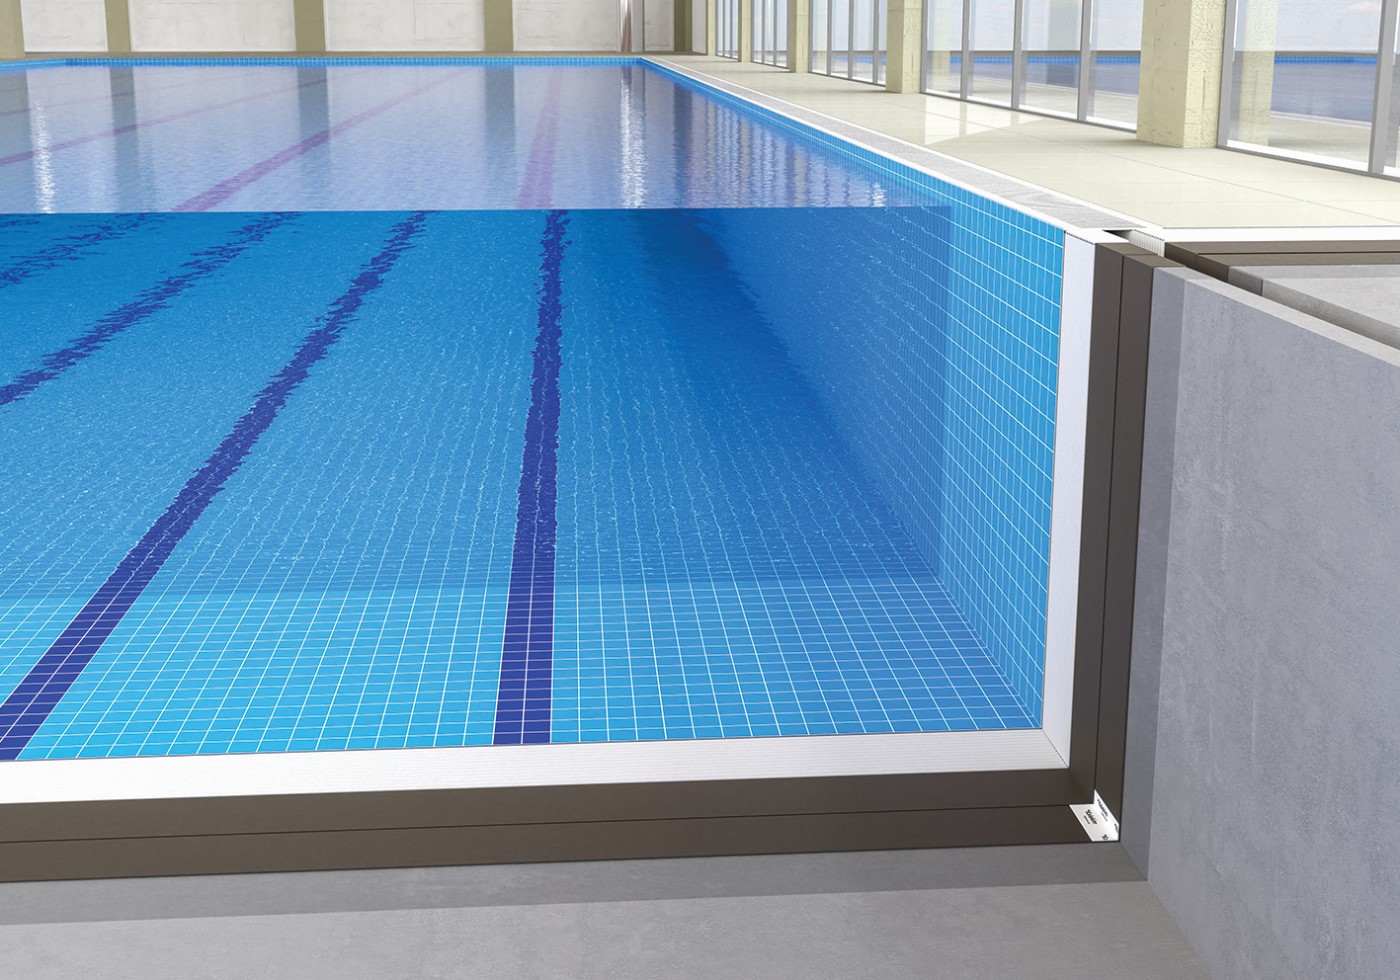 Solutions for Waterproofing & Ceramic Tile Application in Swimming Pools 